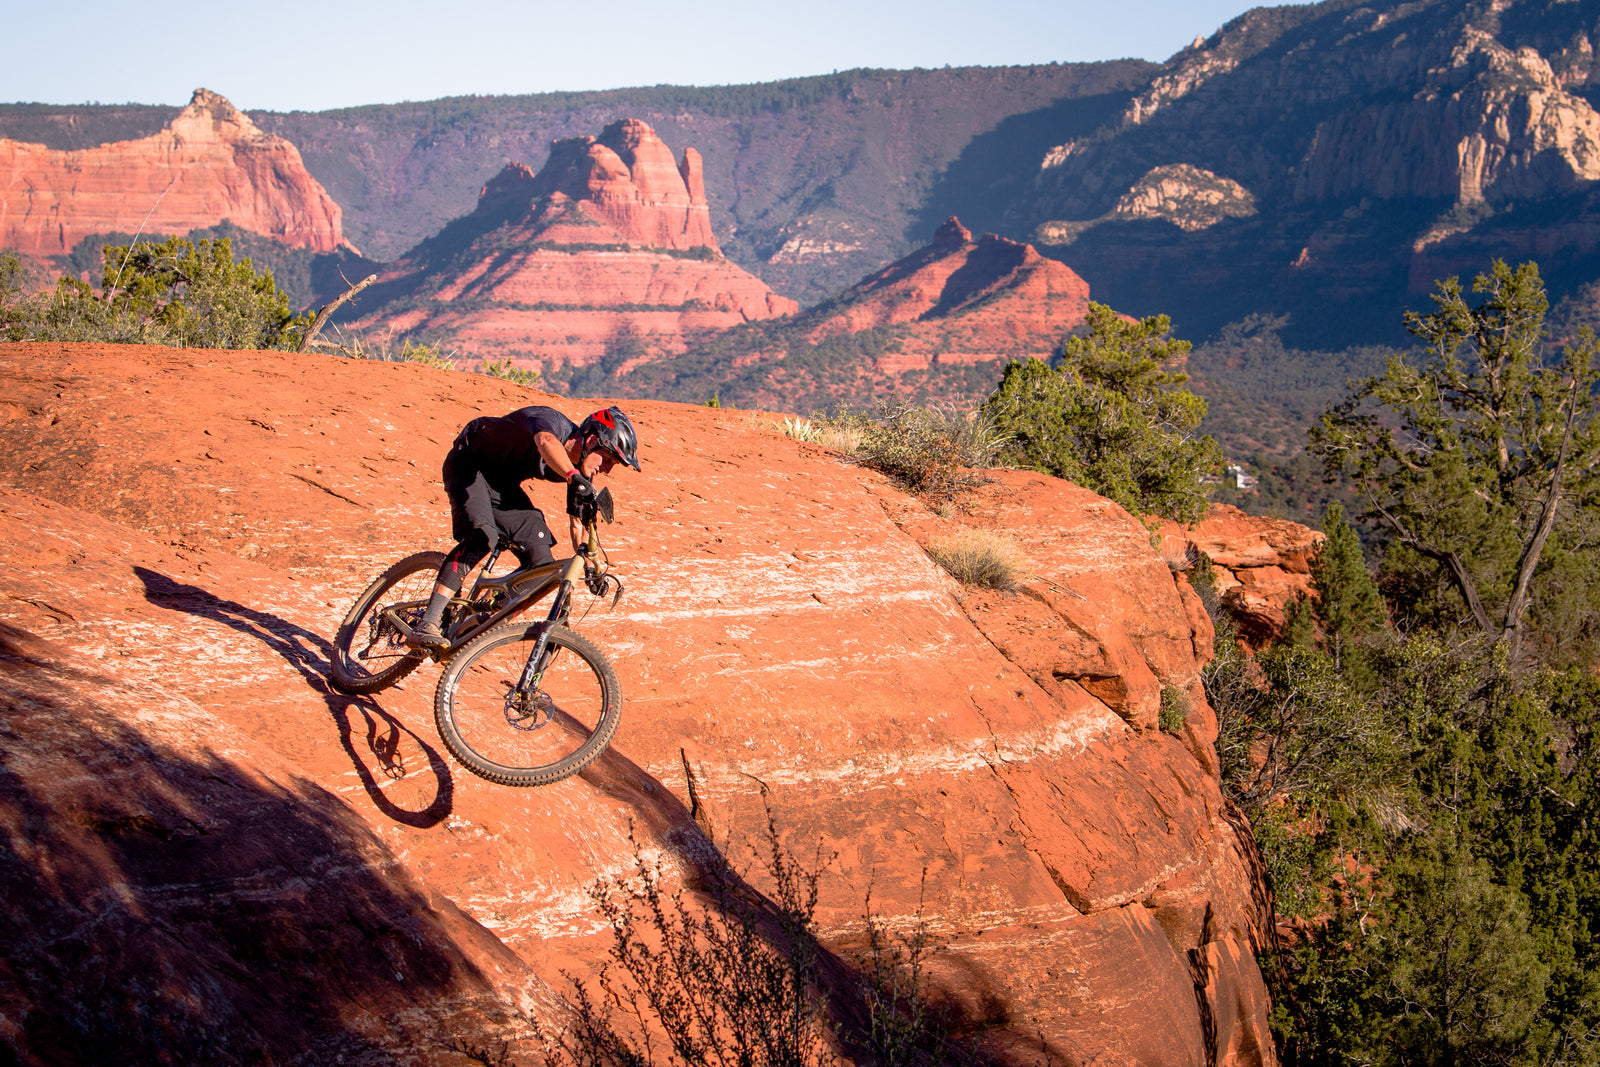 Brian Lopes riding Sedona red rock on E-MTB with KENDA Tires